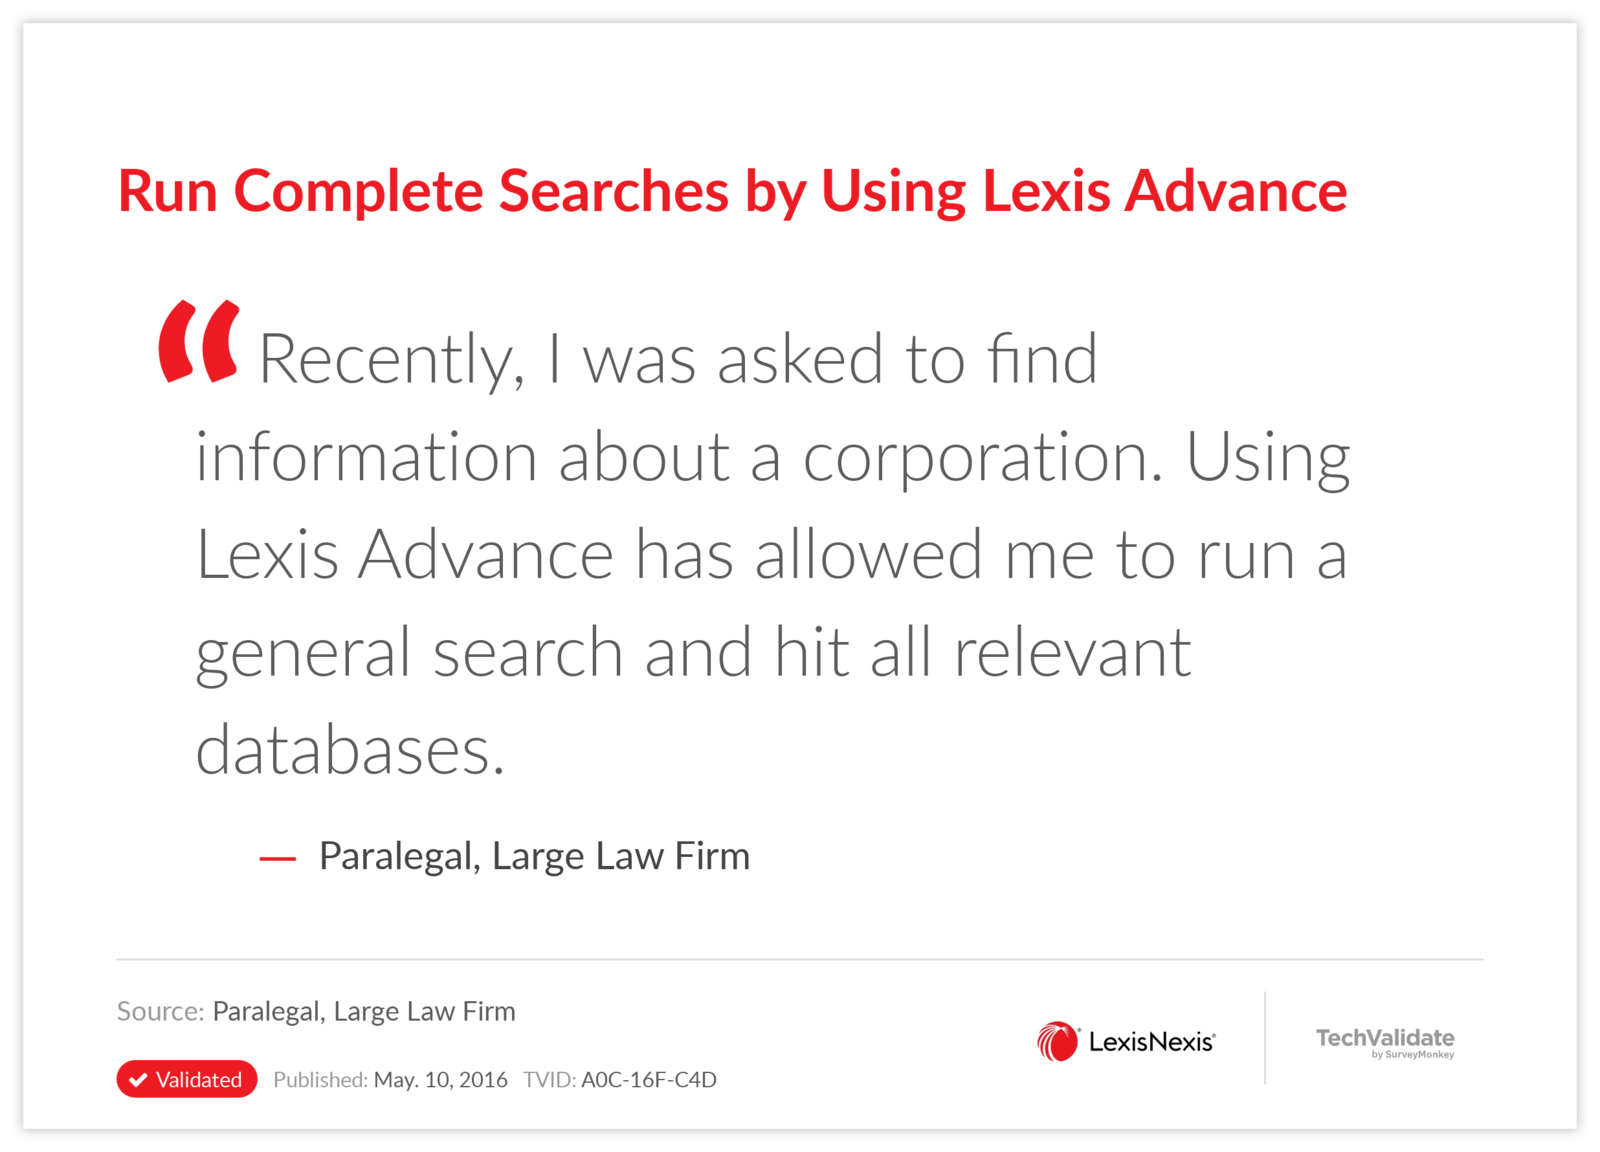 Run Complete Searches by Using Lexis Advance